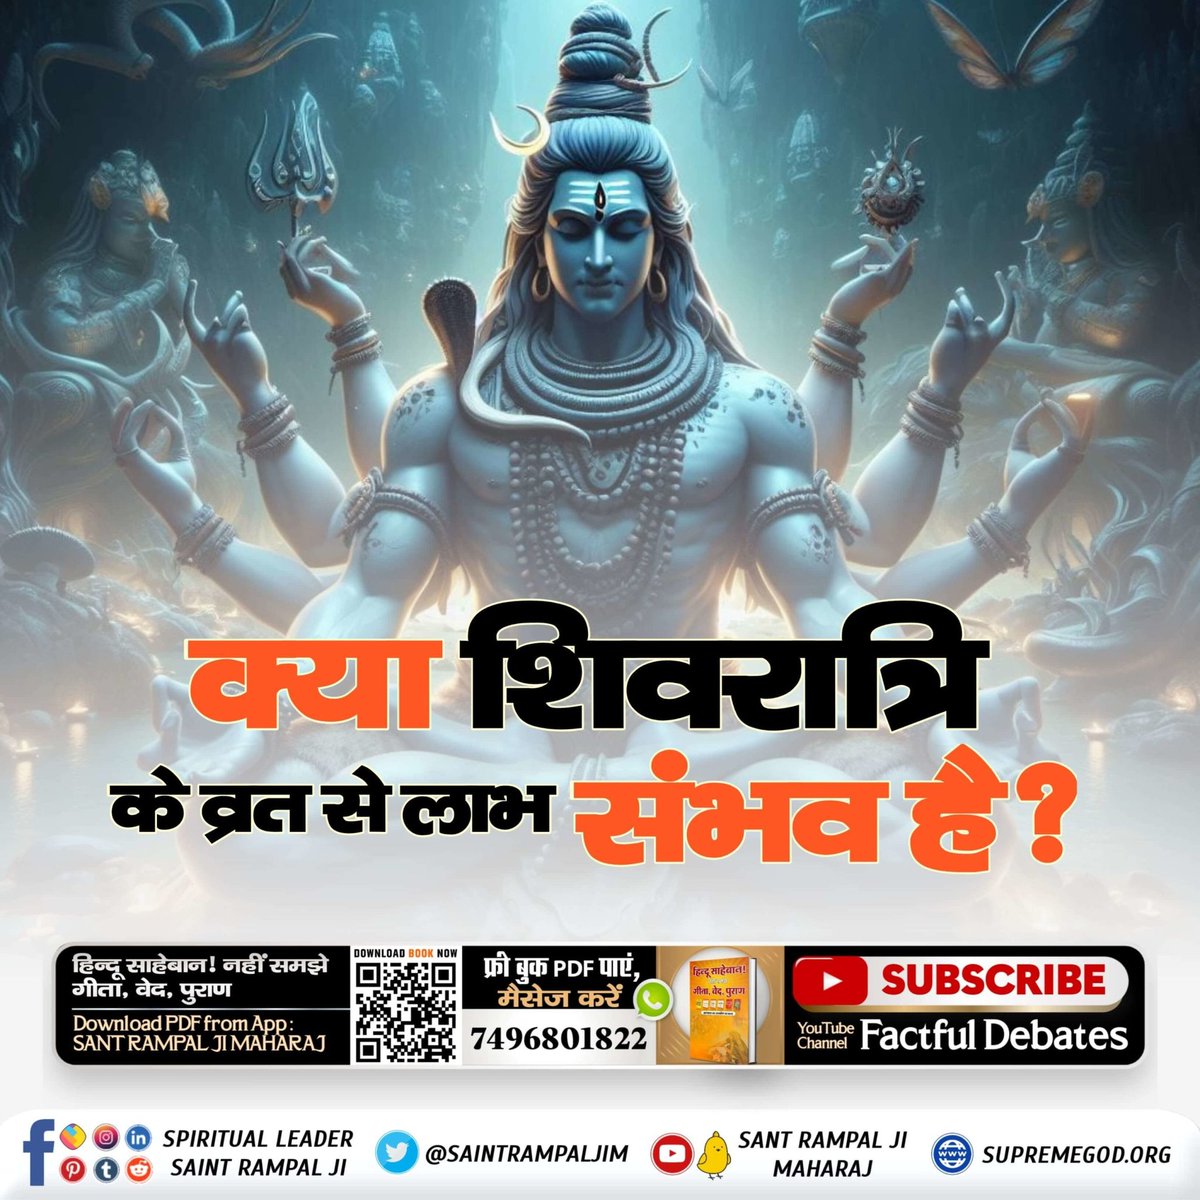 #शिवजी_किसका_ध्यान_धरते_हैं
Shivratri which is one of the sacred festivals for the devotees of Lord Shiva.  Lord Shiva is considered indestructible and immortal by the devotees.  But is Lord Shiva in reality Mrityunjaya and is any benefit possible from fasting on Shivratri?